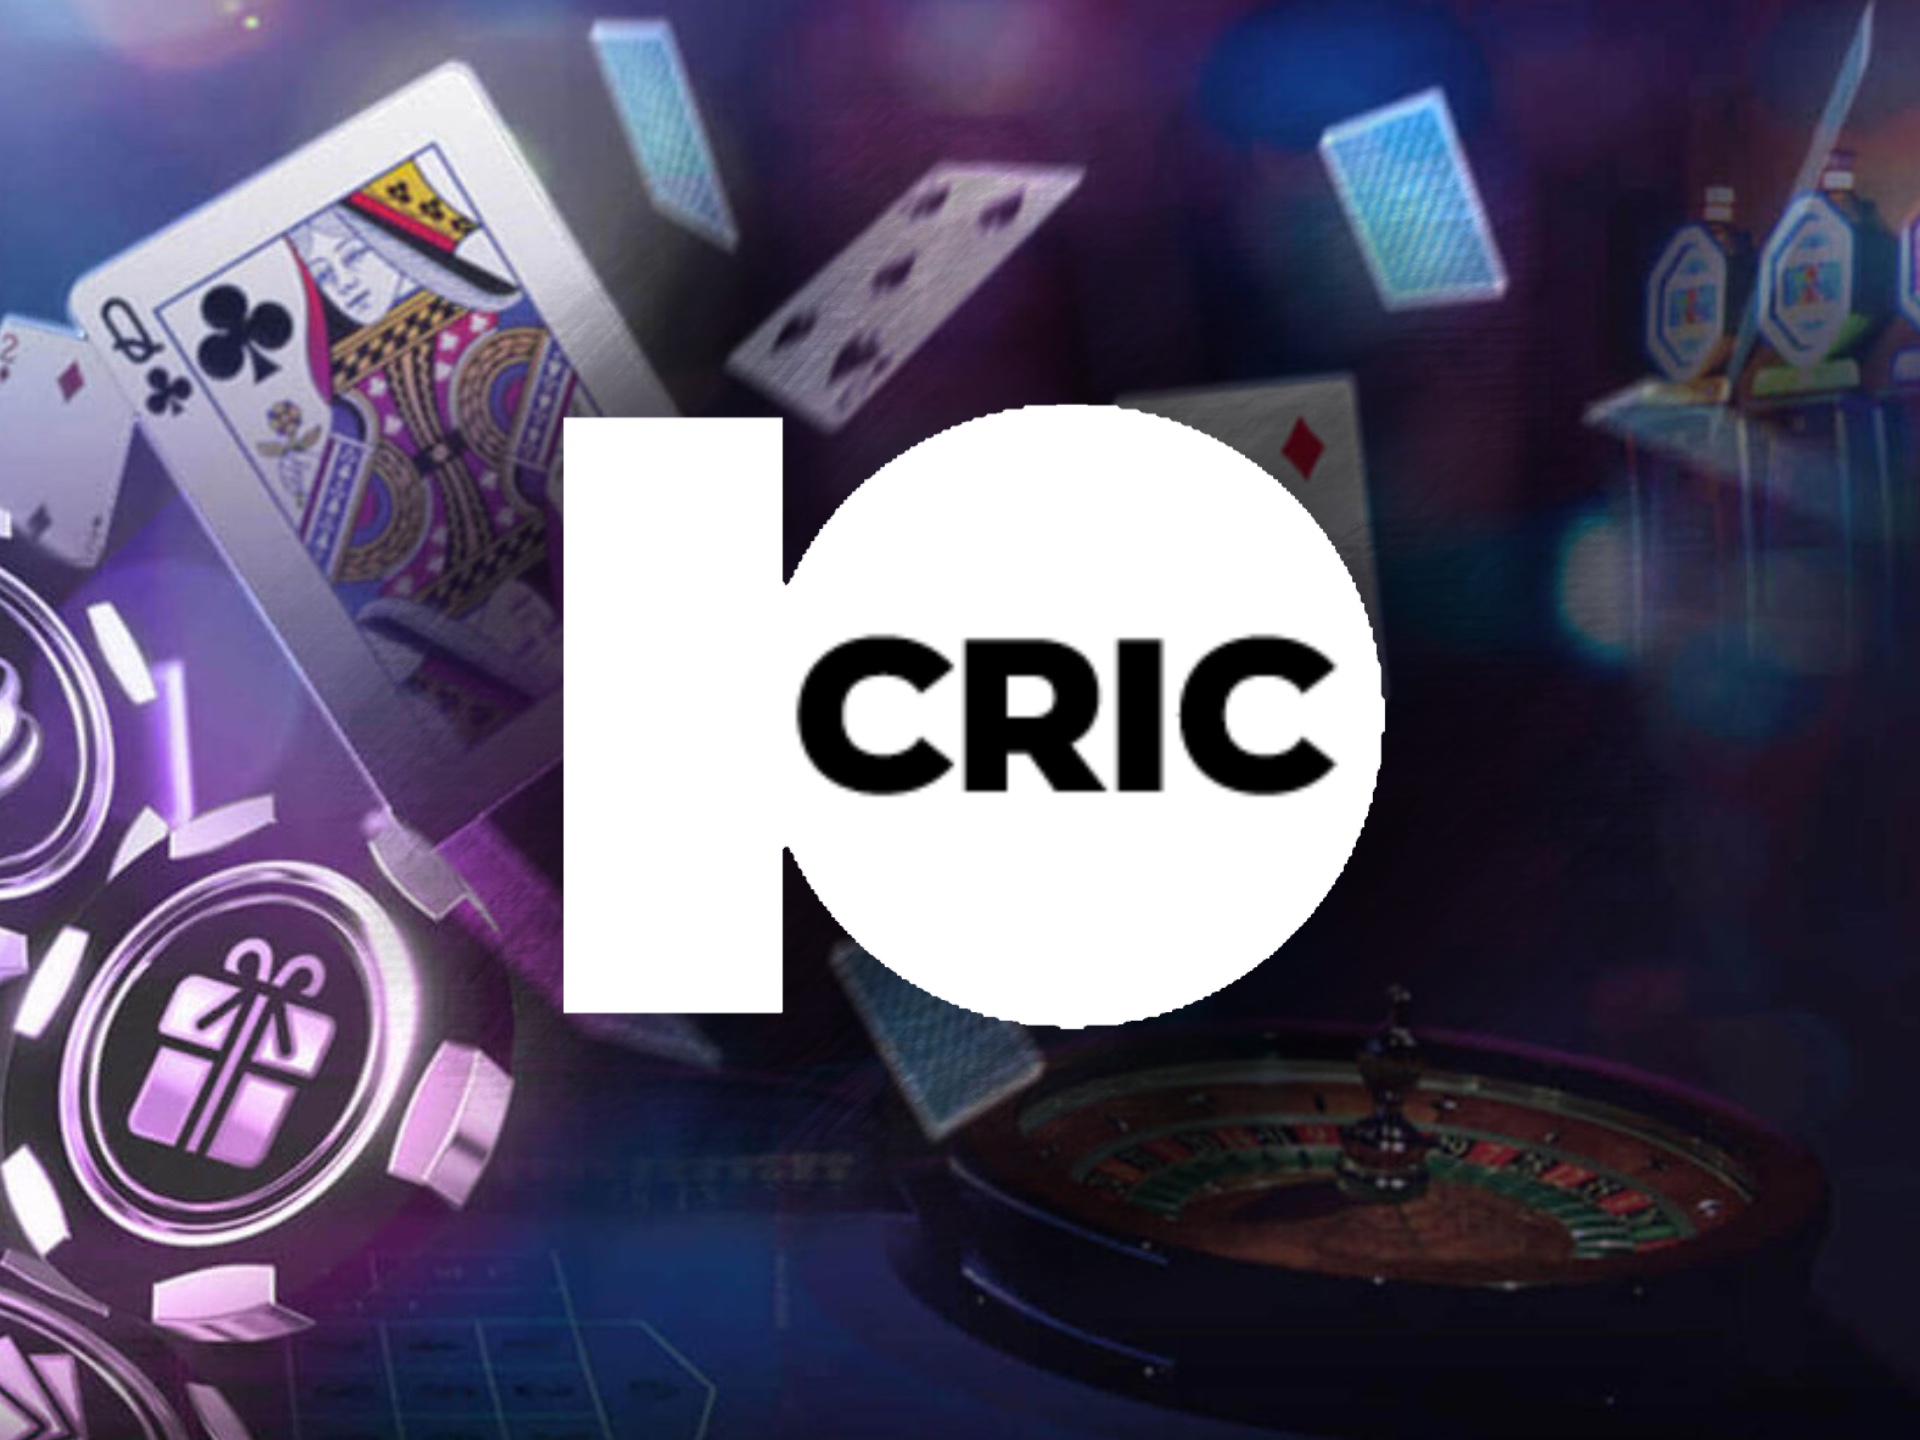 10cric online casino is pretty popular for gambling in India.